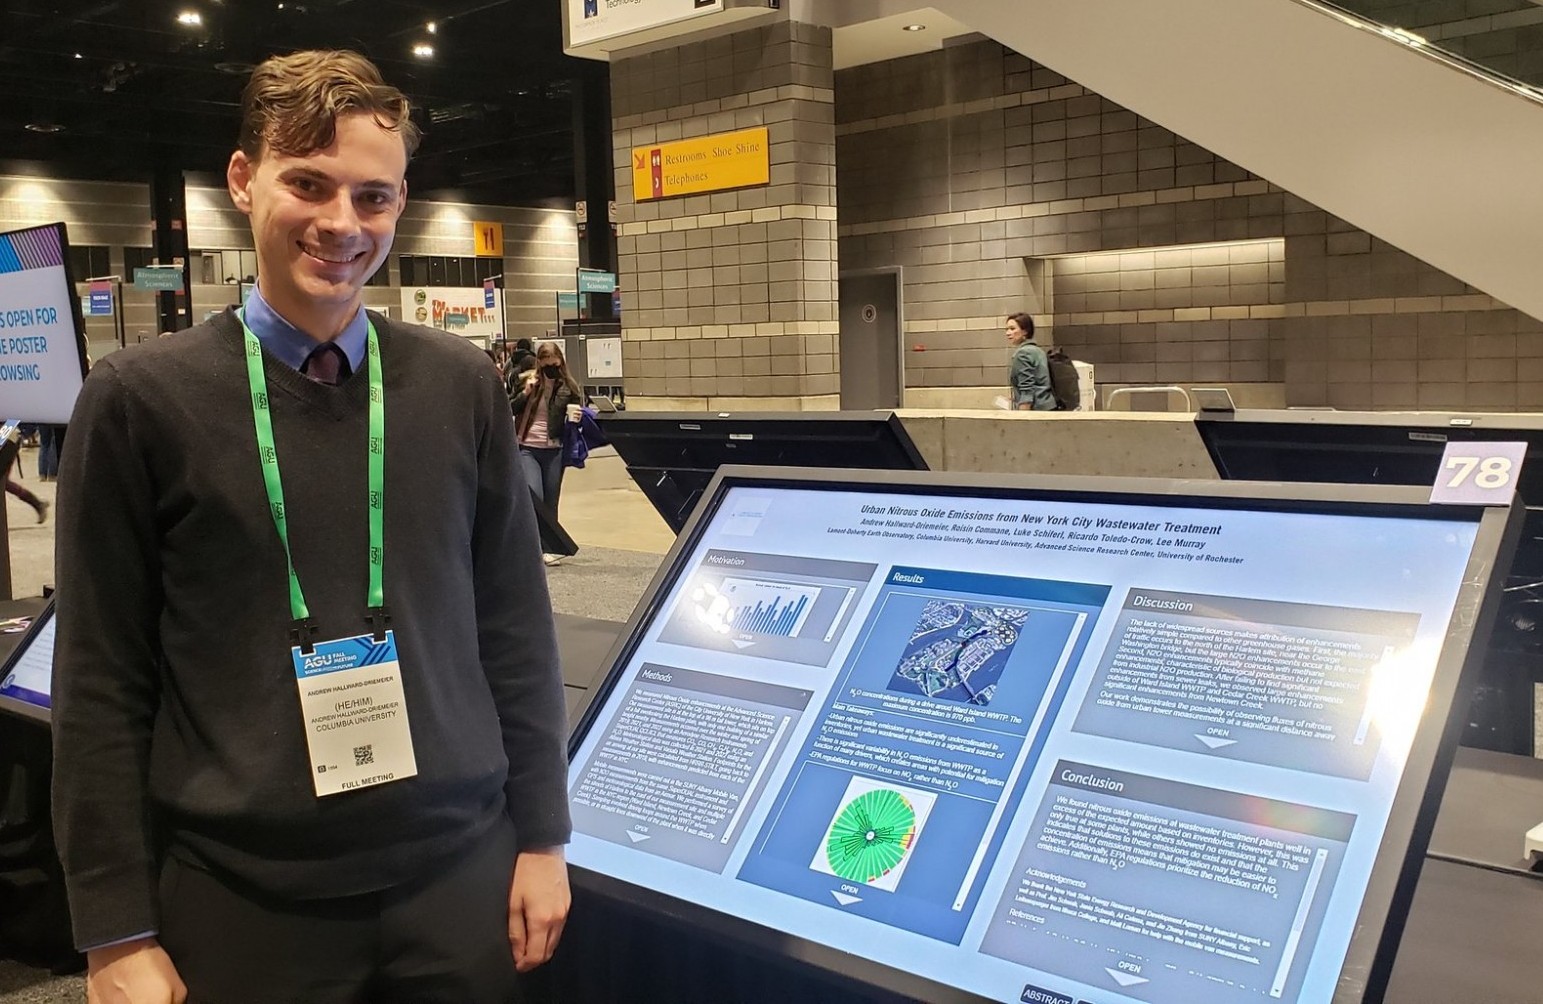 Andrew Hallward-Driemeier presenting a virtual poster in the poster hall at AGU